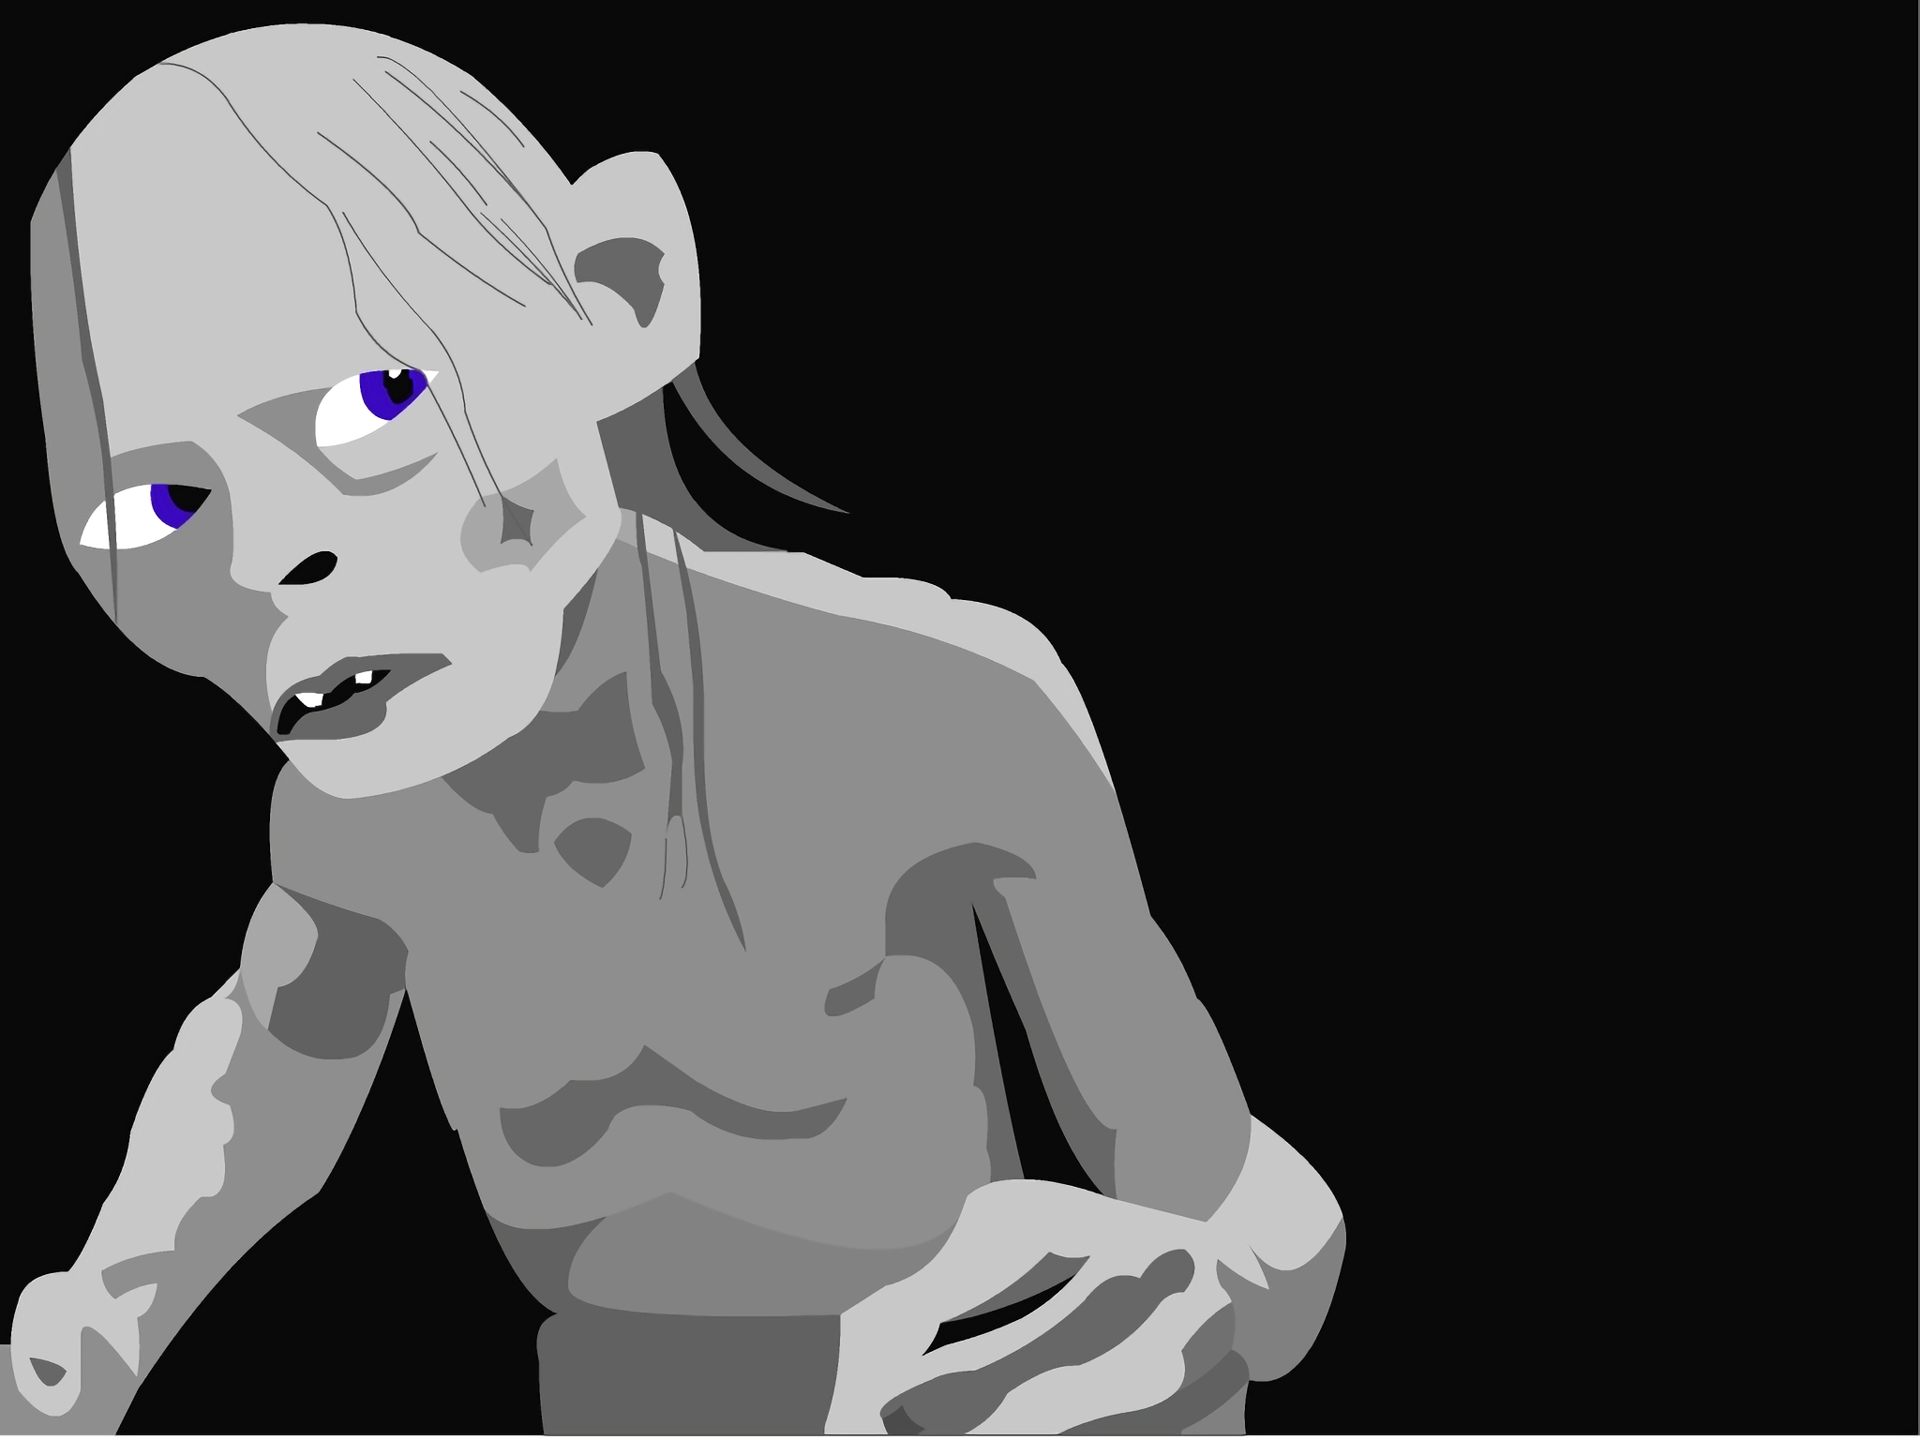 Gollum holding the ring in a dark cave.